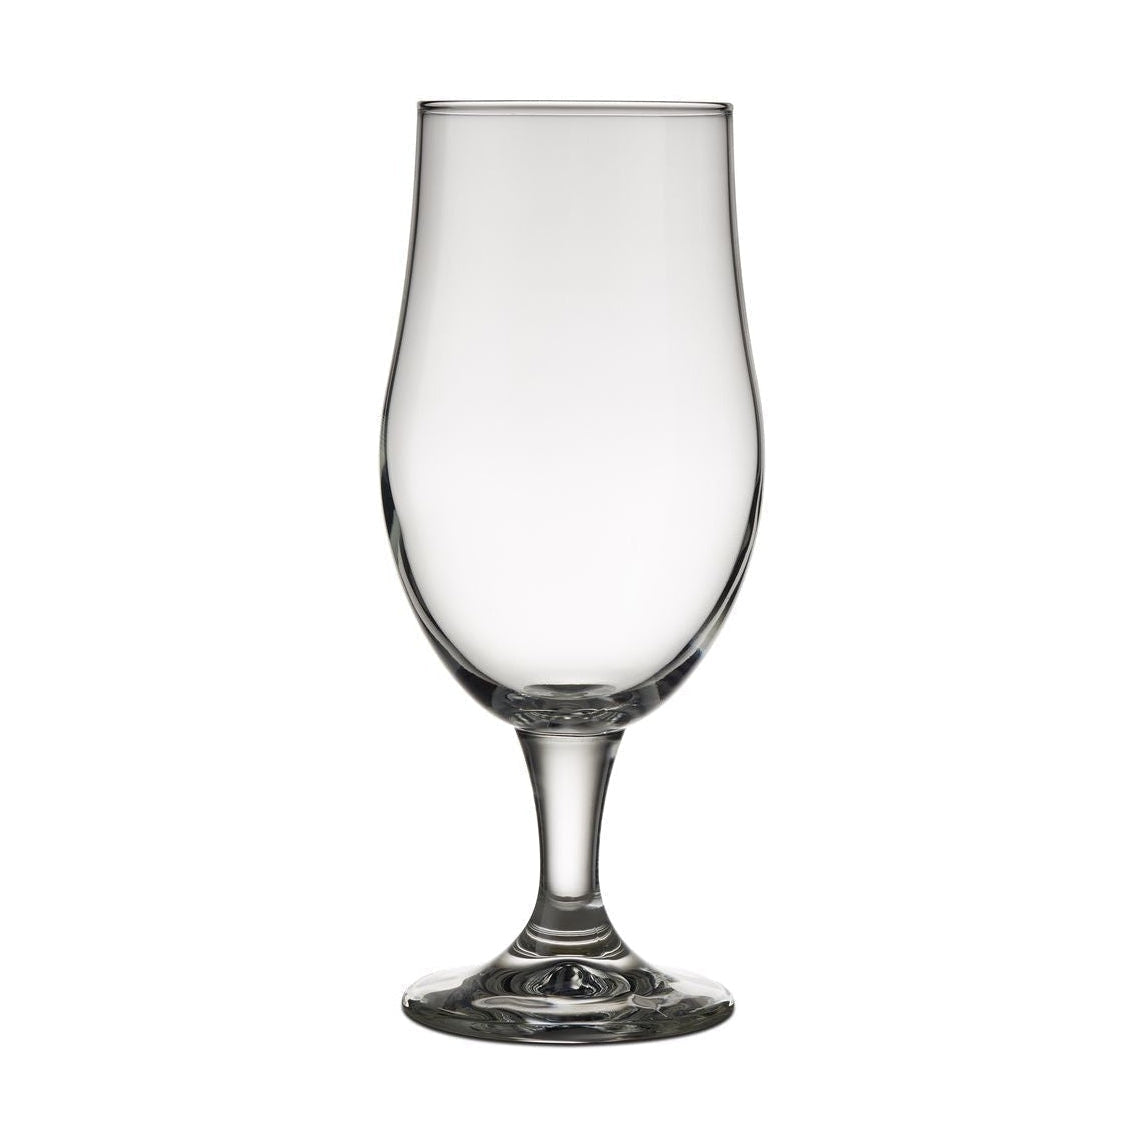 Lyngby Glas Juvel Beer Glass 49 cl，4个。